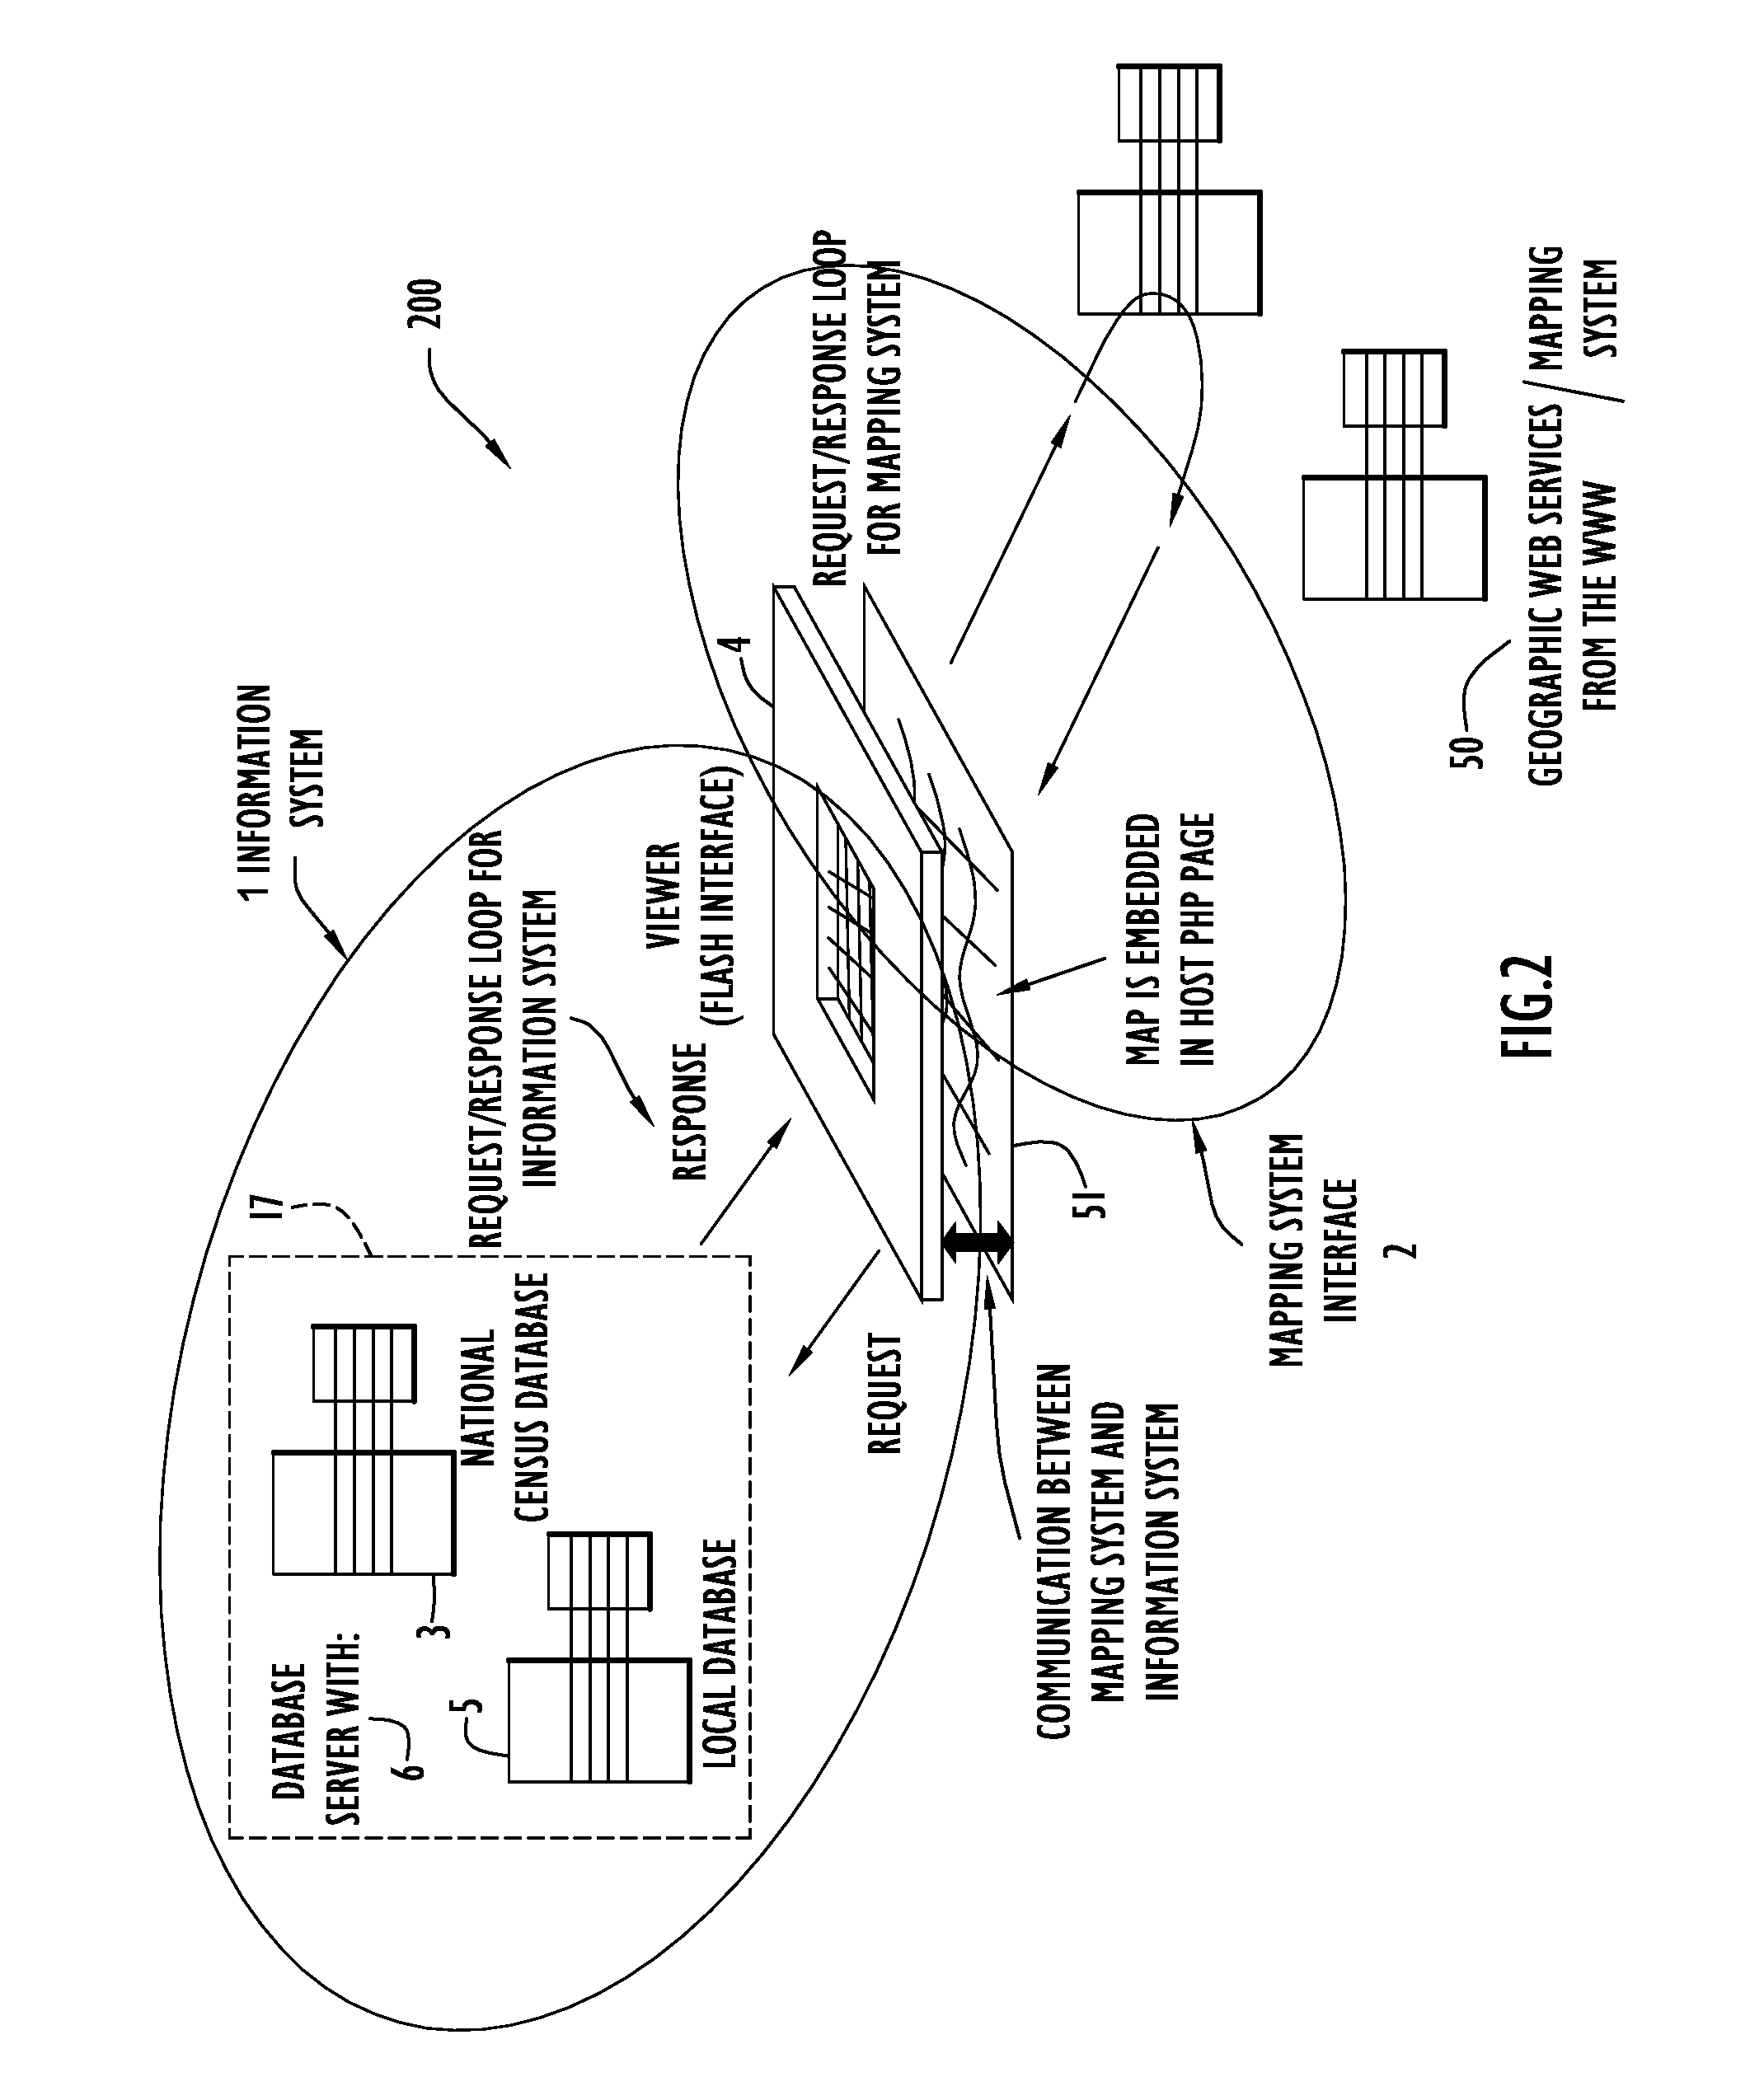 System and method of overlaying and integrating data with geographic mapping applications